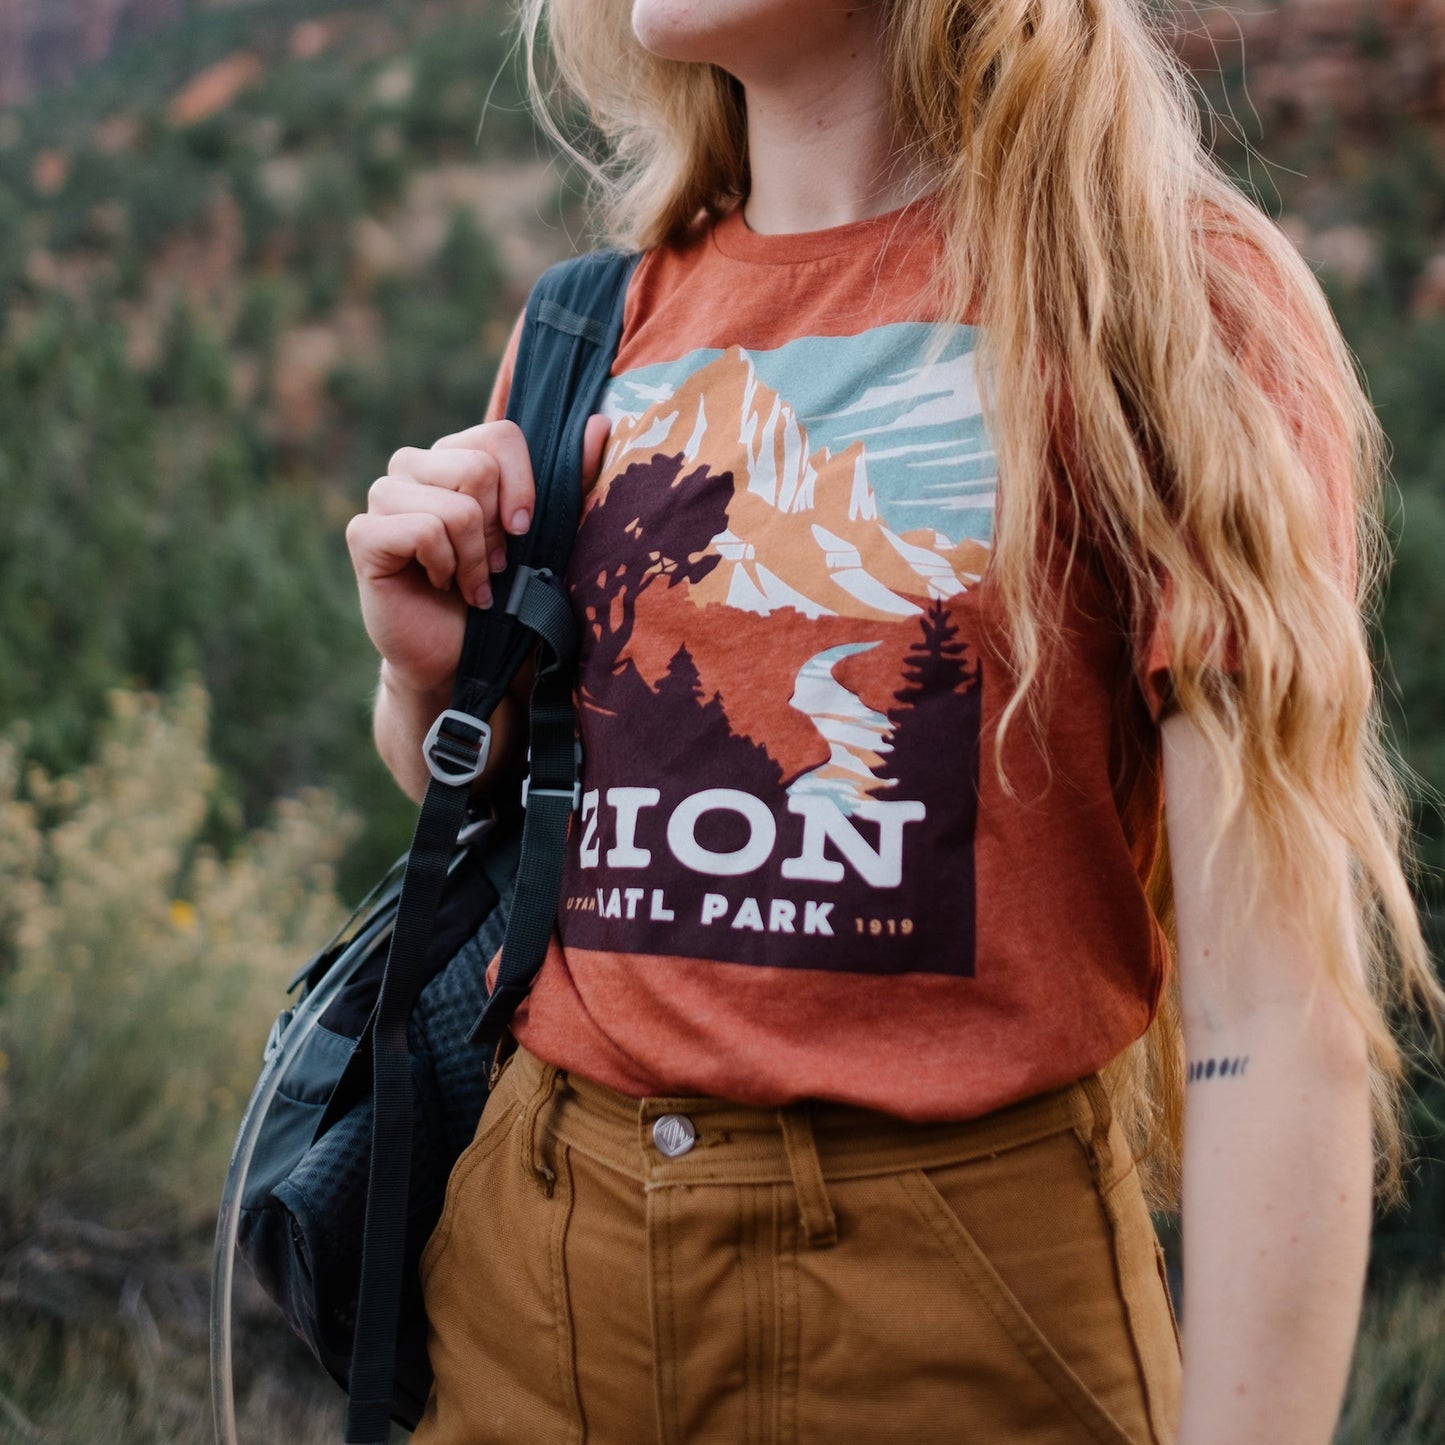 Zion National Park t-shirt in clay